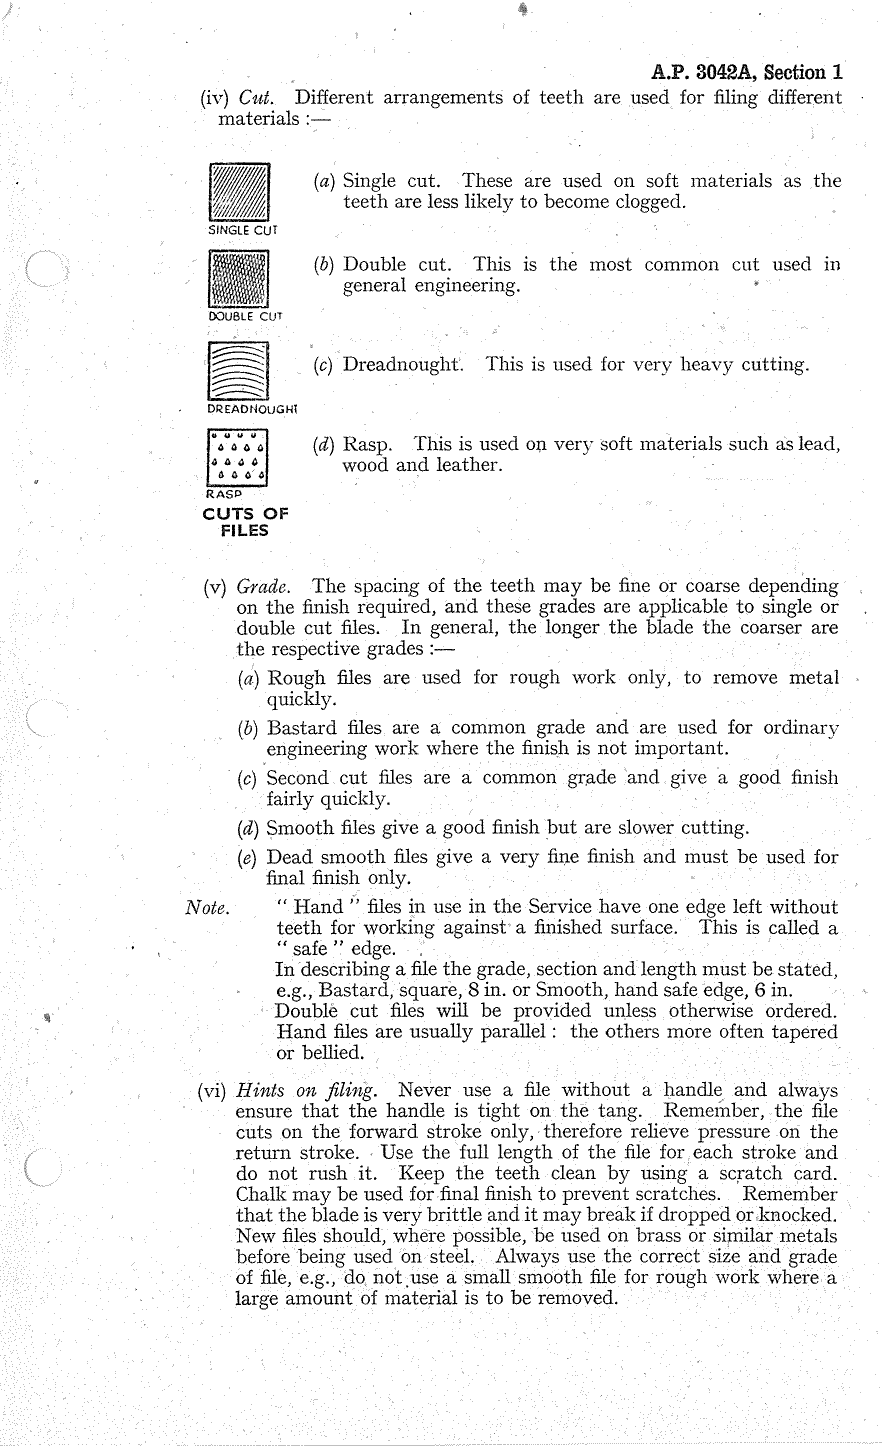 Sample page 8 from AirCorps Library document: Technical Training Notes for Airframe Flight Mechanics